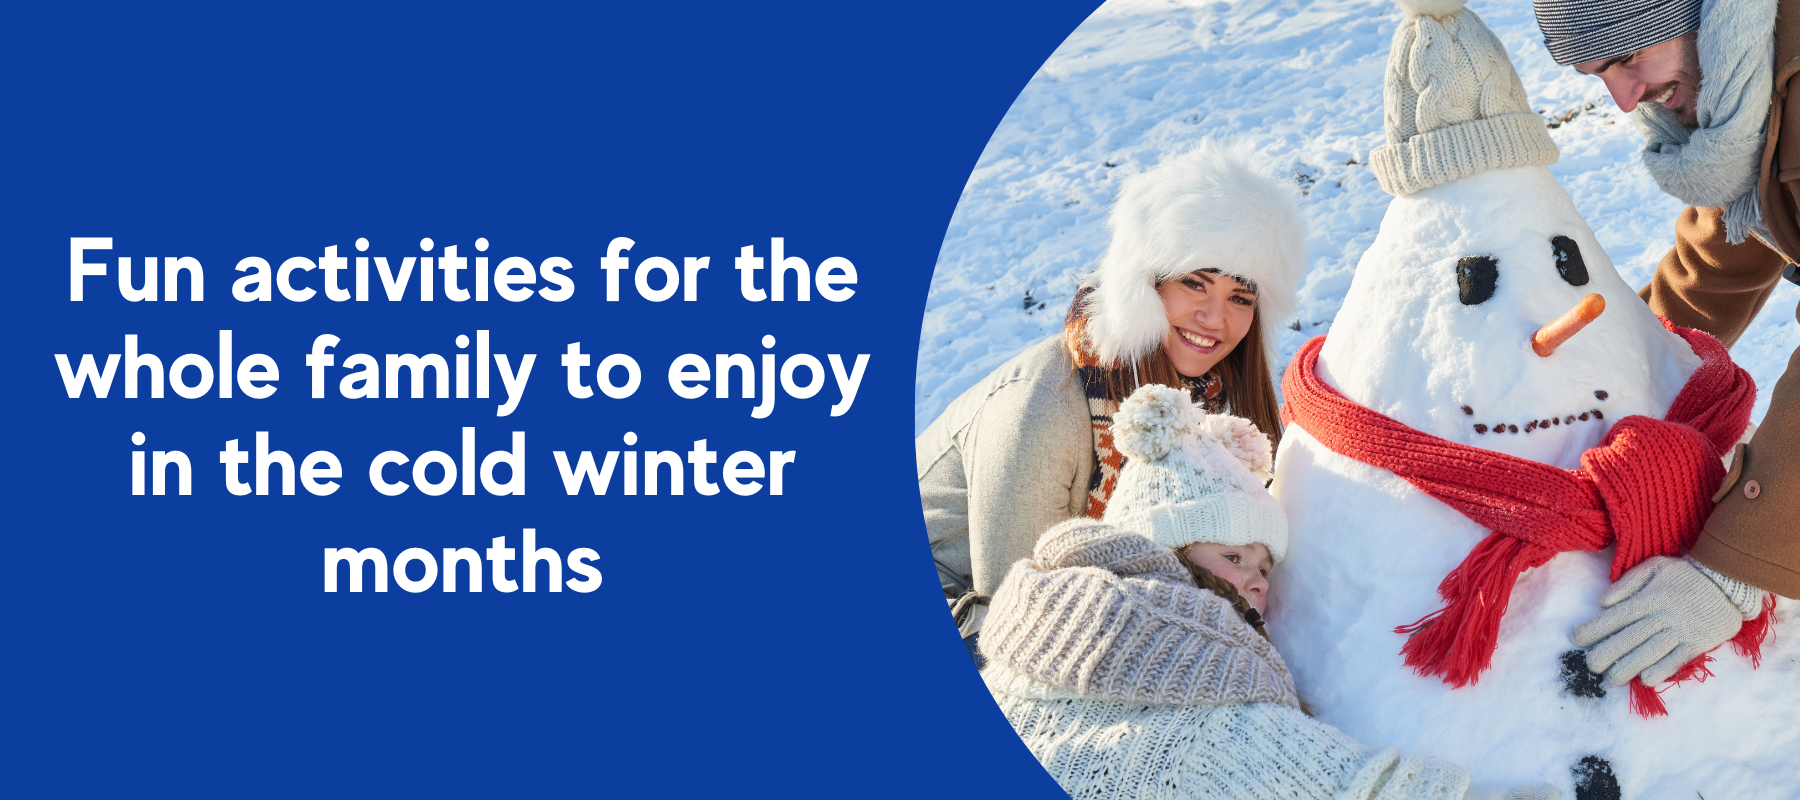 Fun activities for the whole family to enjoy in the cold winter months